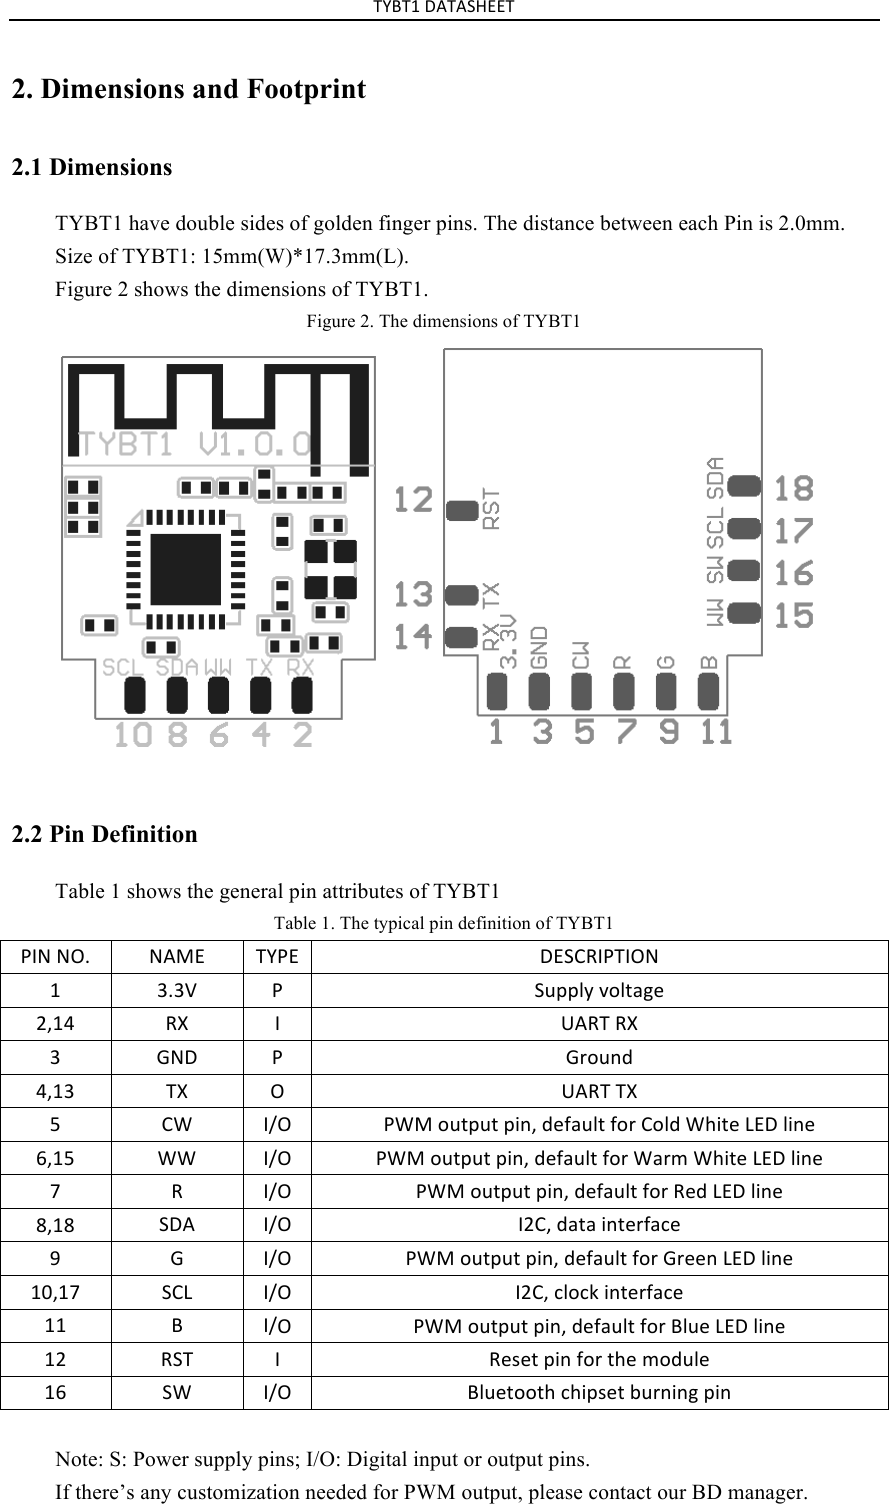 TYBT1%DATASHEET%2. Dimensions and Footprint2.1 Dimensions TYBT1 have double sides of golden finger pins. The distance between each Pin is 2.0mm. Size of TYBT1: 15mm(W)*17.3mm(L). Figure 2 shows the dimensions of TYBT1. Figure 2. The dimensions of TYBT1 2.2 Pin Definition Table 1 shows the general pin attributes of TYBT1 Table 1. The typical pin definition of TYBT1 PIN%NO.%NAME%TYPE%DESCRIPTION%1% 3.3V% P% Supply%voltage%2,14%RX% I% UART%RX%3%GND% P% Ground%4,13%TX% O% UART%TX%5% CW%I/O%PWM%output%pin,%default%for%Cold%White%LED%line%6,15%WW%I/O%PWM%output%pin,%default%for%Warm%White%LED%line%7% R% I/O%PWM%output%pin,%default%for%Red%LED%line%8,18%SDA%I/O%I2C,%data%interface%9% G% I/O%PWM%output%pin,%default%for%Green%LED%line%10,17%SCL%I/O%I2C,%clock%interface%11% B% I/O%PWM%output%pin,%default%for%Blue%LED%line%12%RST% I% Reset%pin%for%the%module%16%SW%I/O%Bluetooth%chipset%burning%pin%Note: S: Power supply pins; I/O: Digital input or output pins. If there’s any customization needed for PWM output, please contact our BD manager. 